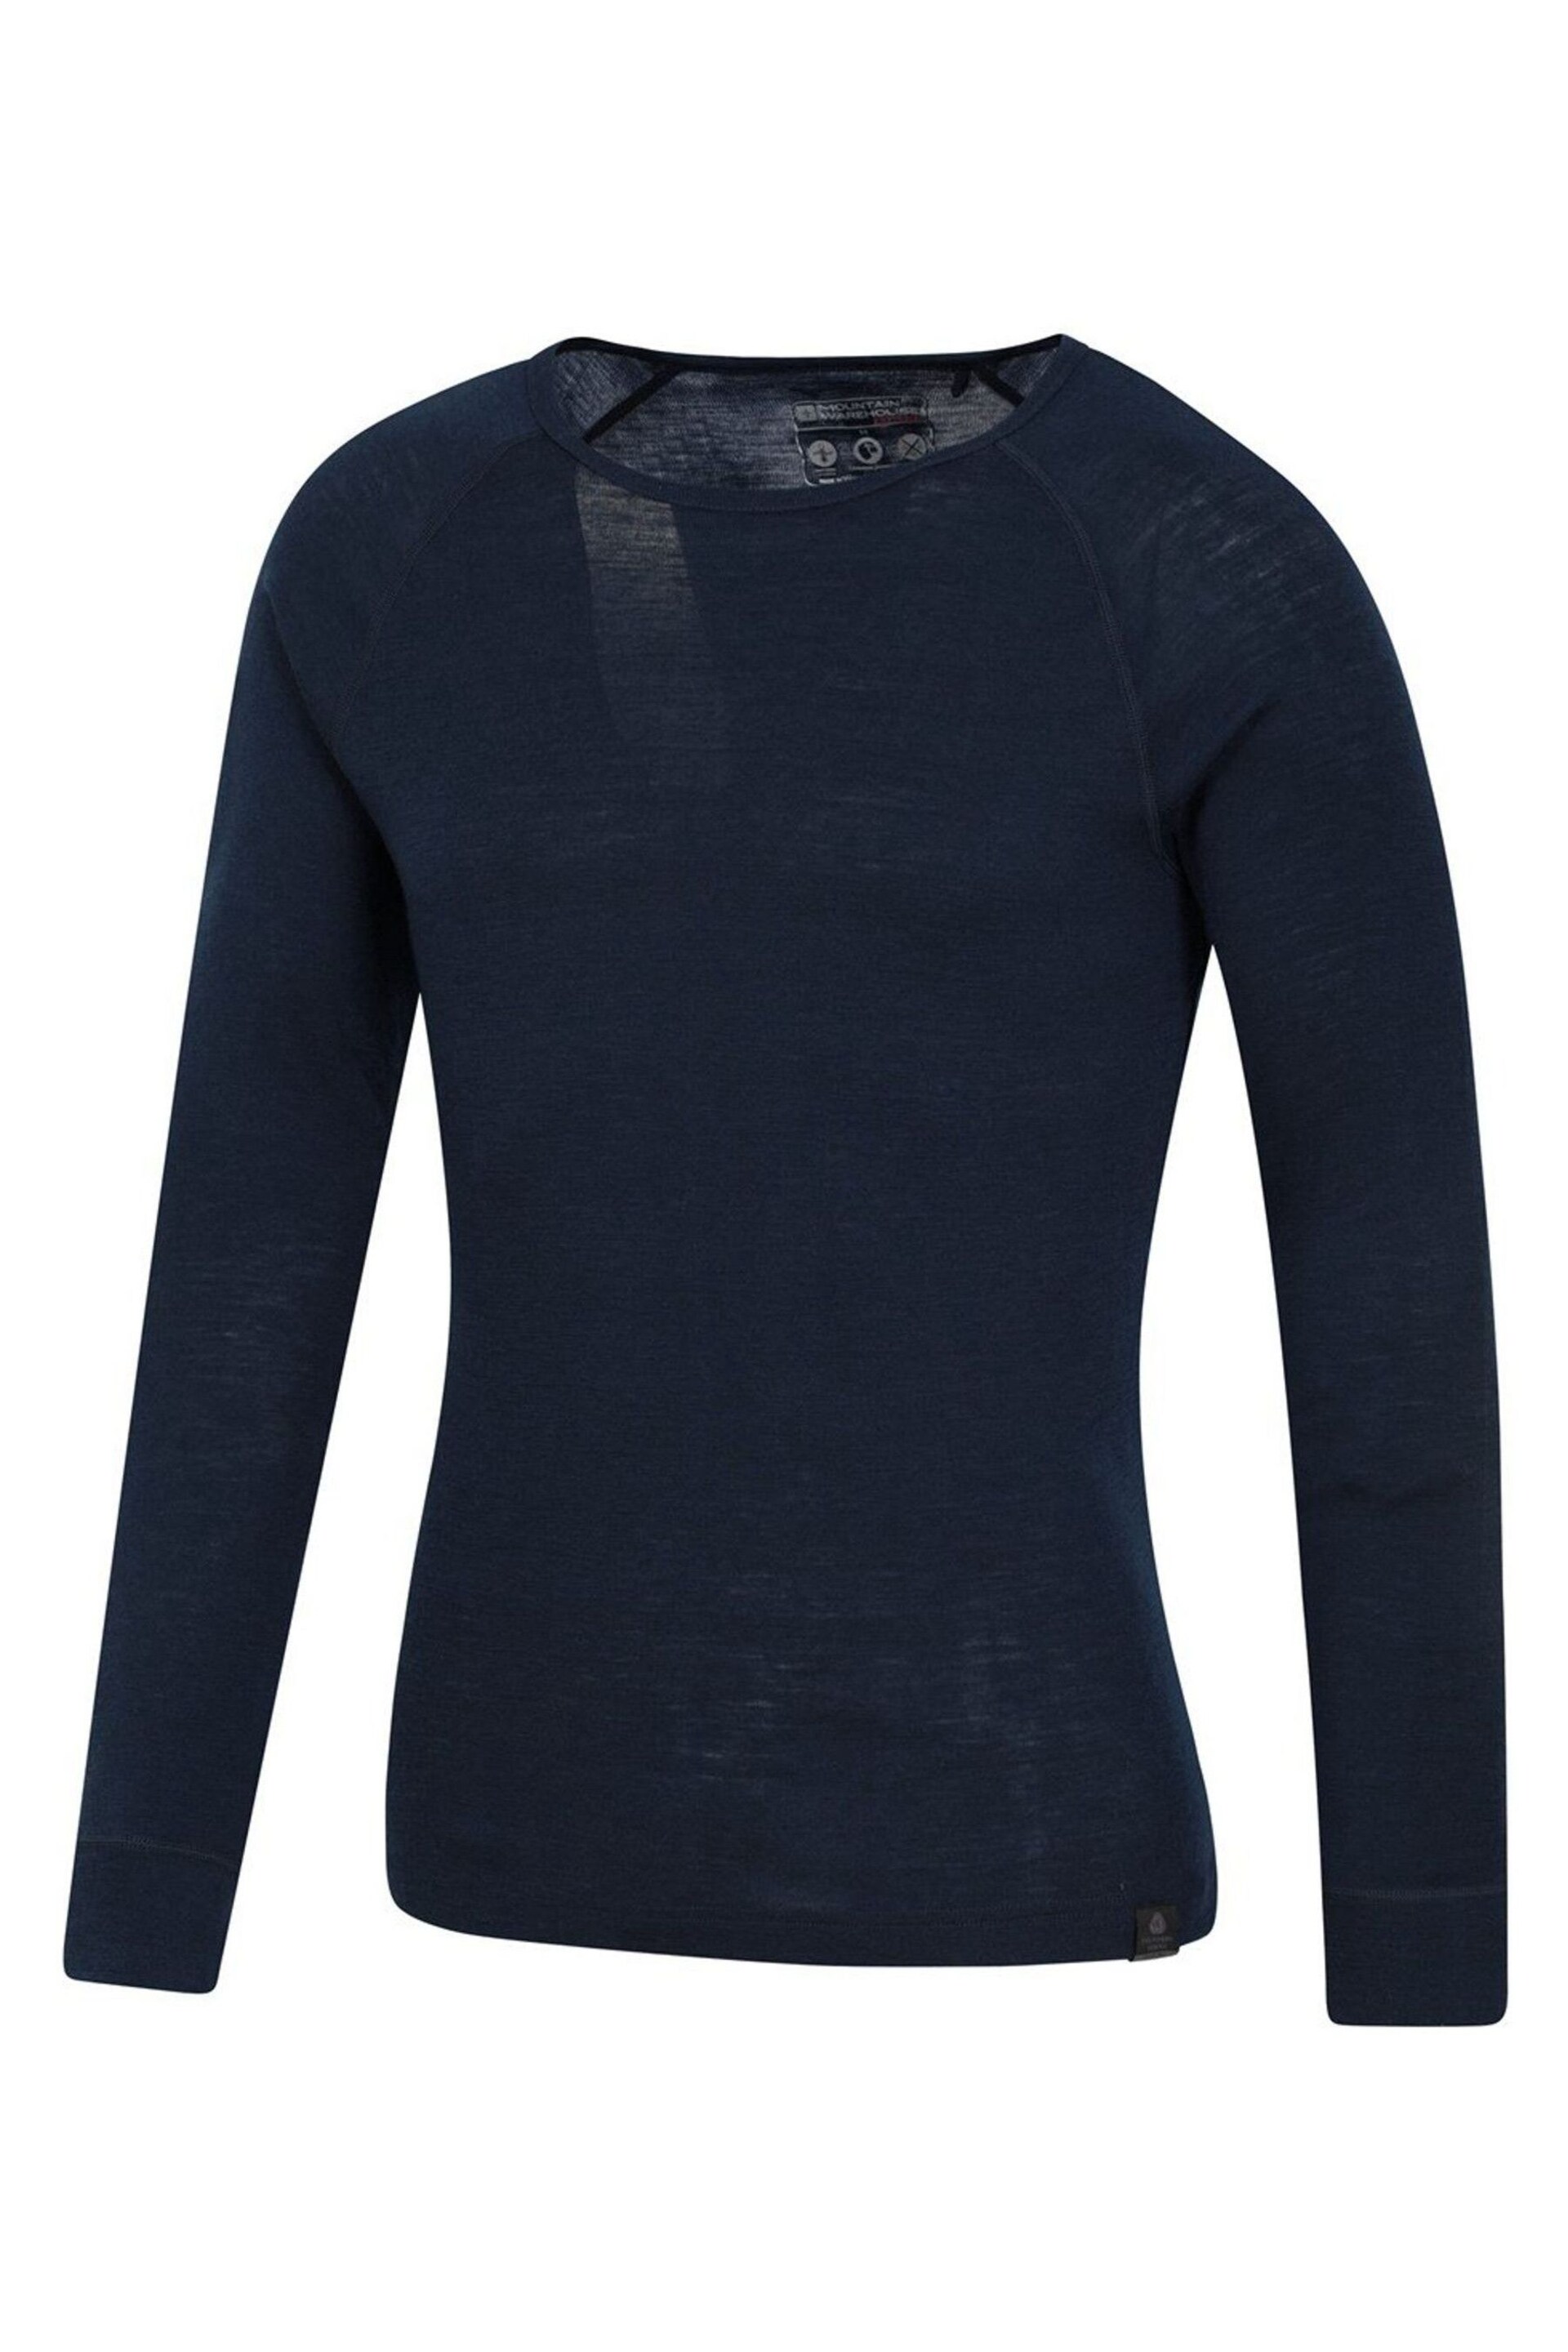 Mountain Warehouse Blue Merino Long Sleeved Thermal Top - Mens - Image 3 of 3